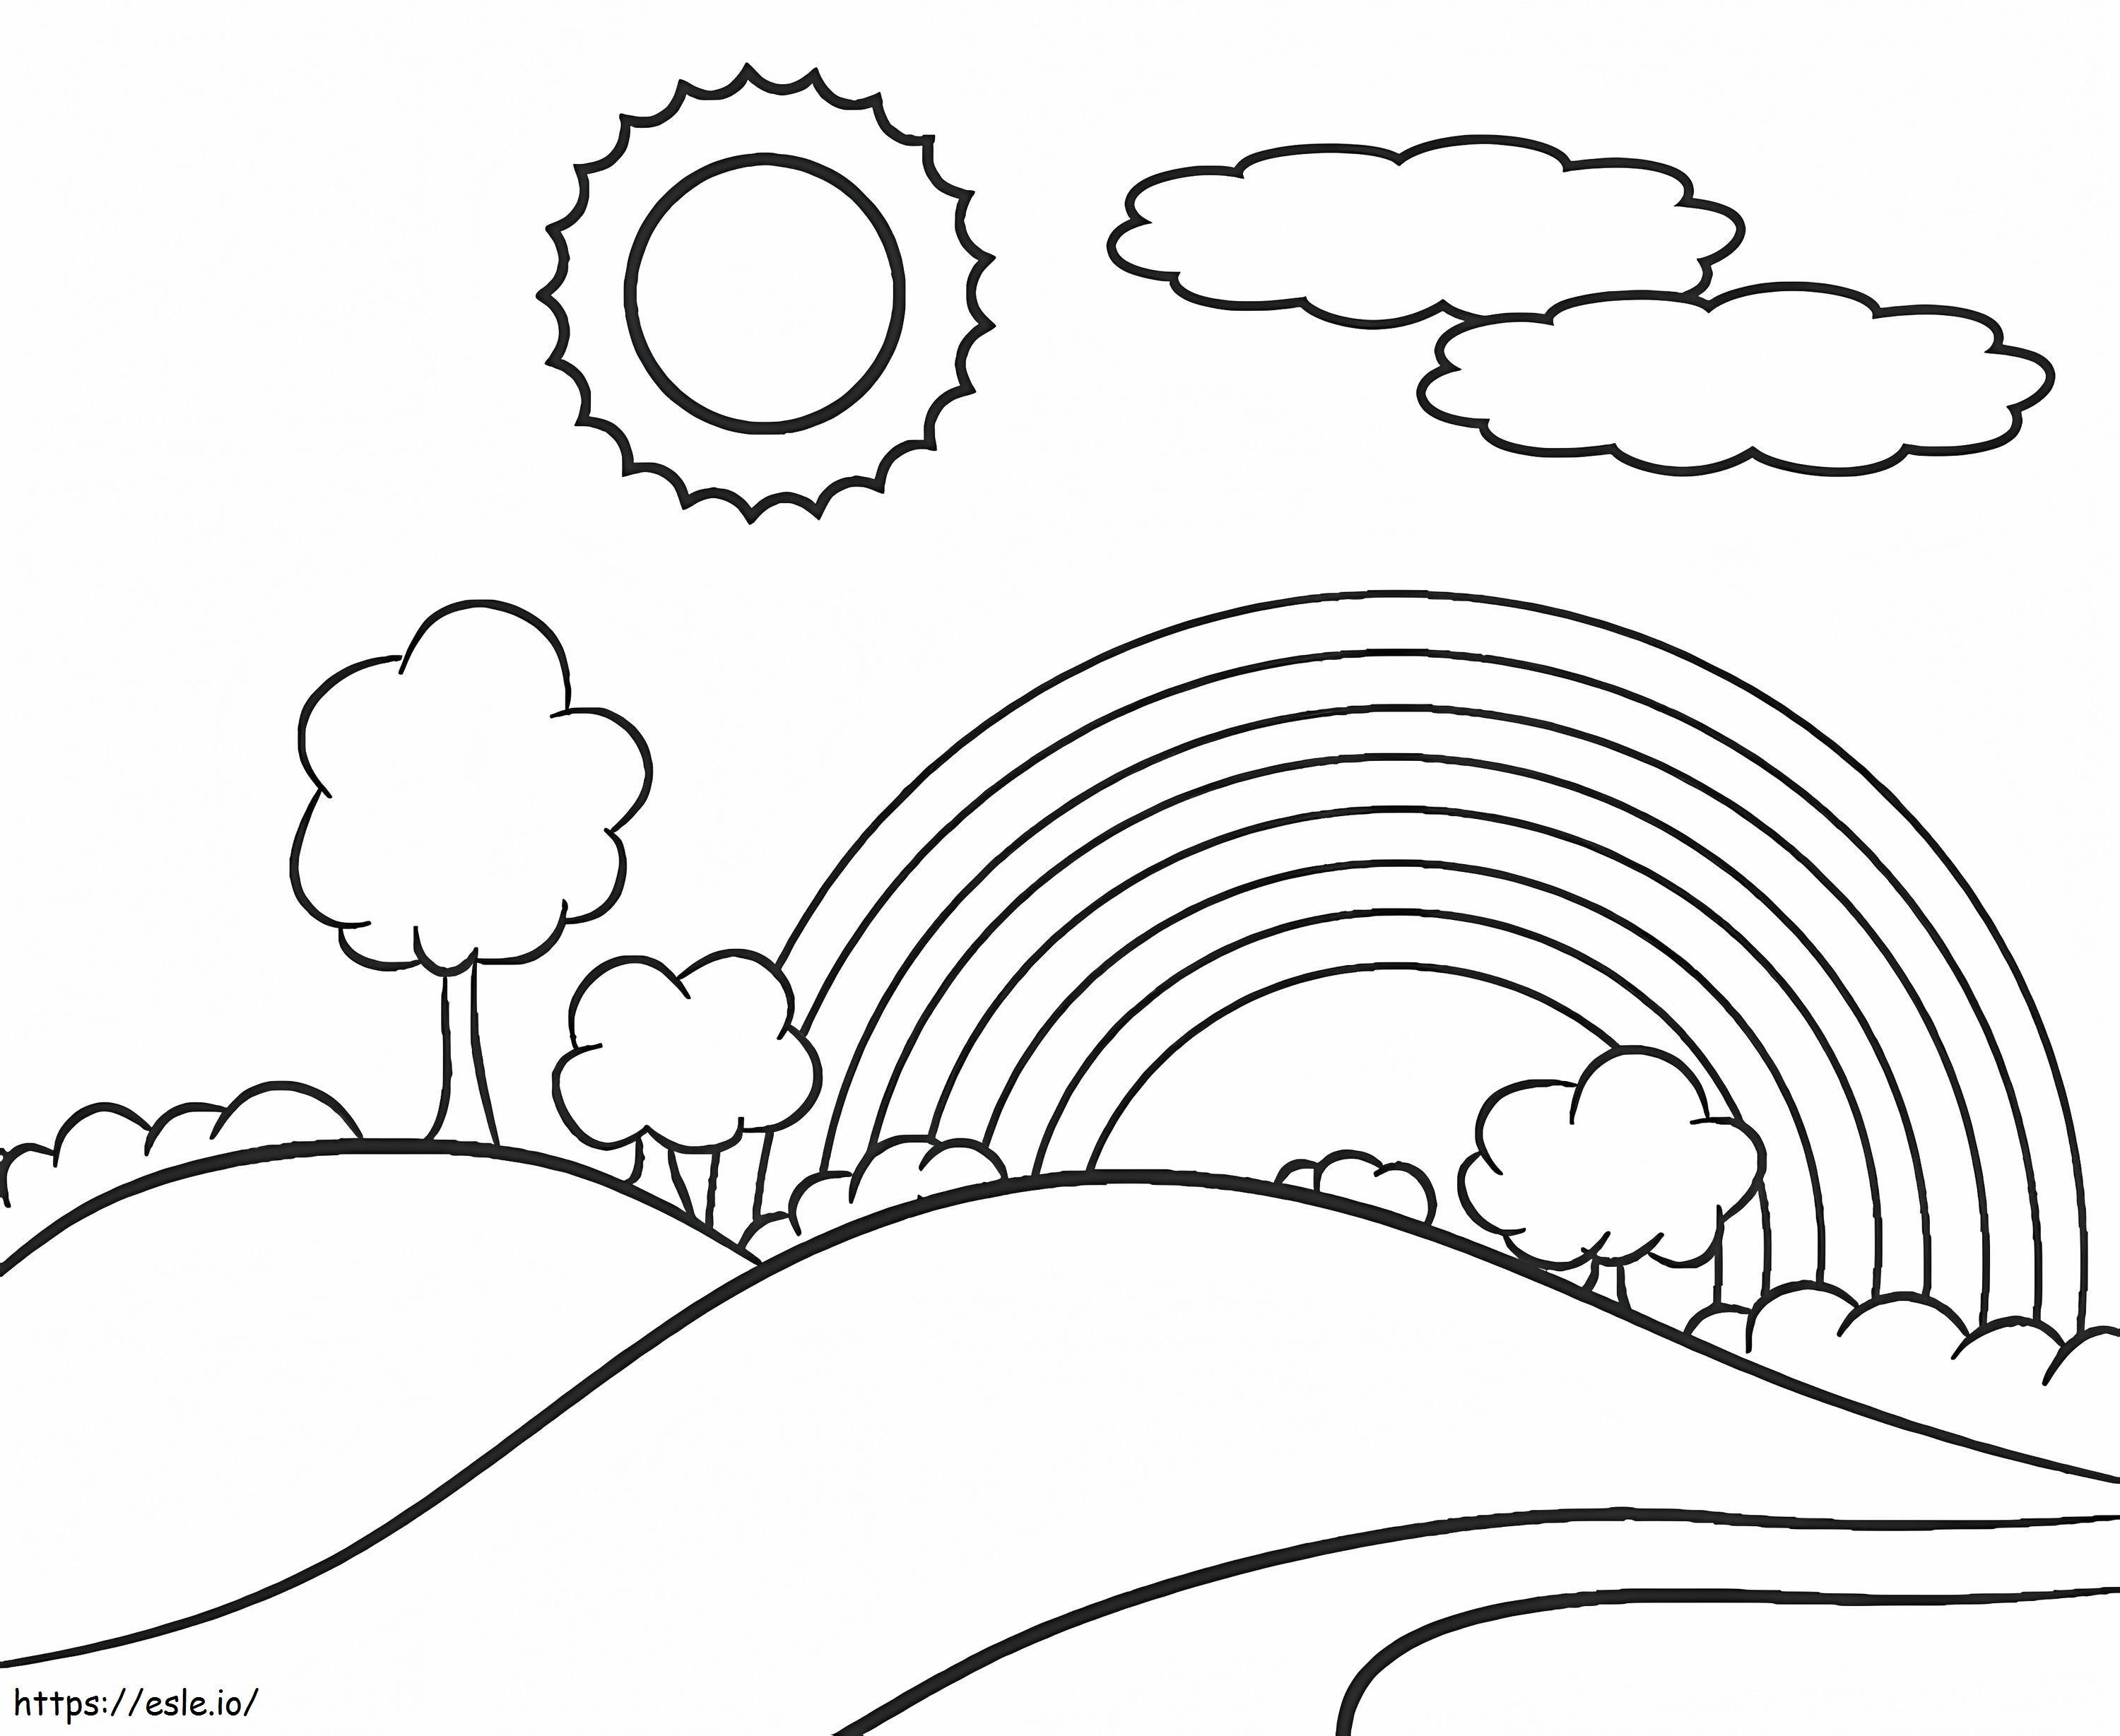 Rainbow Scenery 3 coloring page